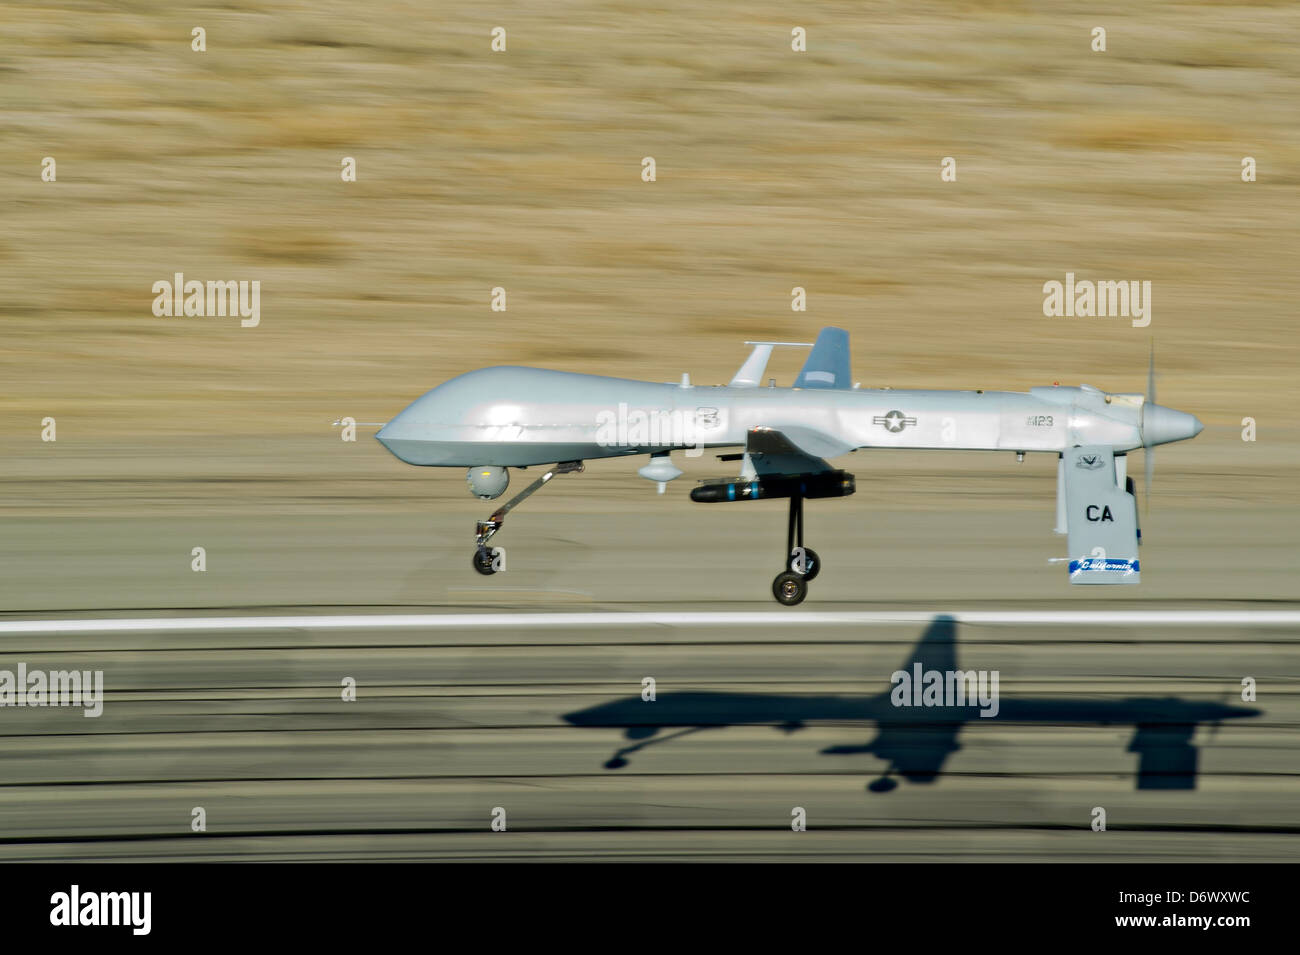 US Air Force MQ-1 Predator unmanned aerial vehicle assigned to the California Air National Guard's 163rd Reconnaissance Wing takes off at the Southern California Logistics Airport January 7, 2012 in Victorville, CA. Stock Photo